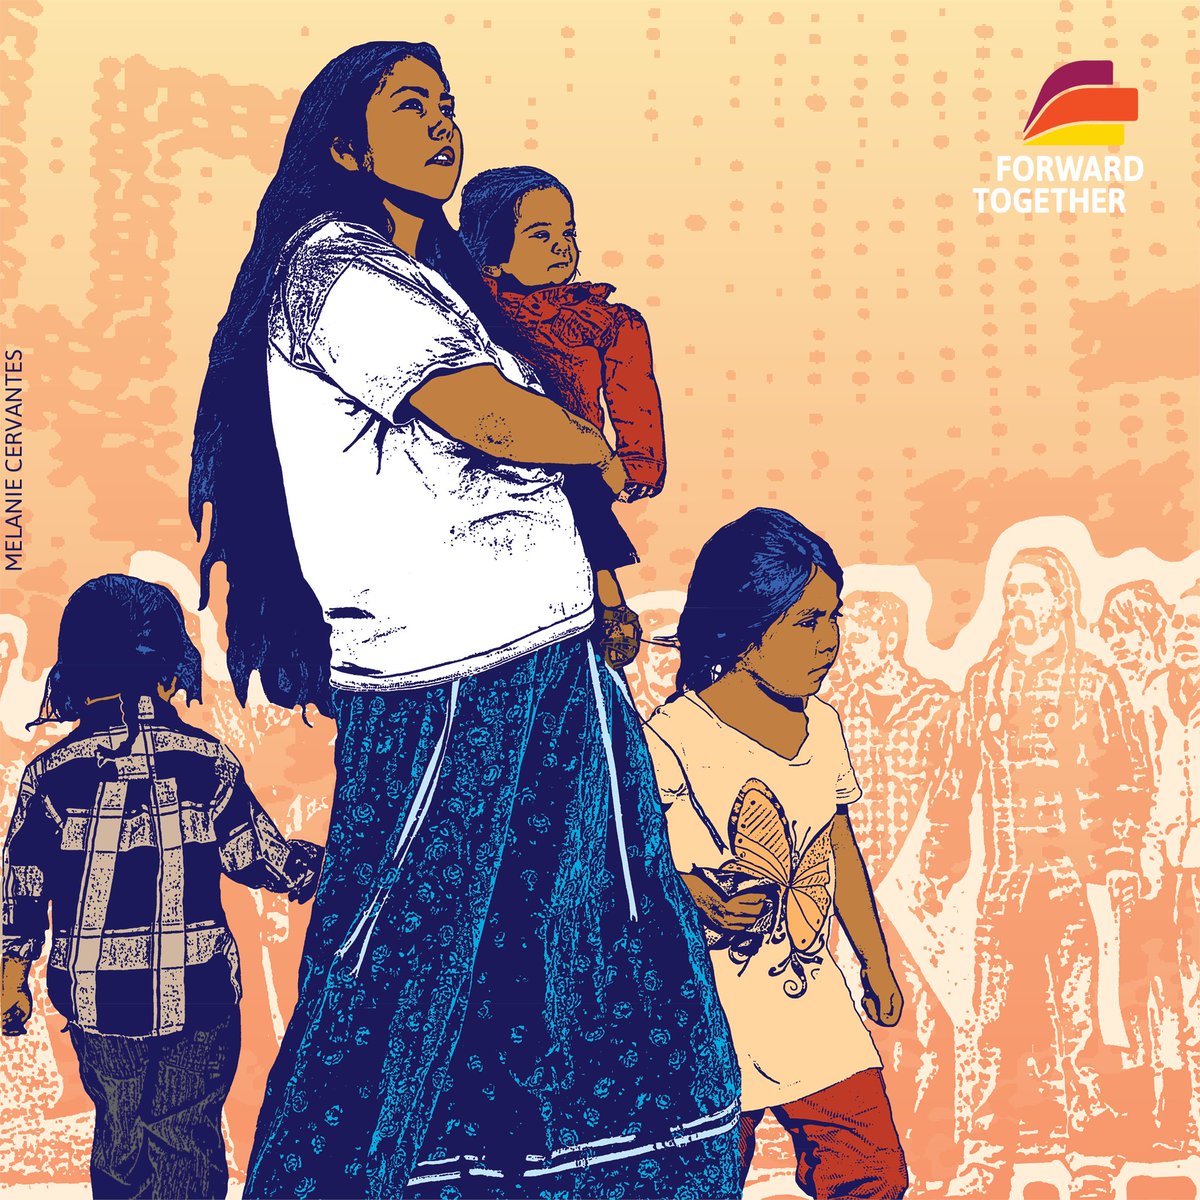 Happy Mother's Day weekend to all the mamas! Movement mamas, trans mamas, refugee mamas, incarcerated mamas, immigrant mamas, young and aging mamas, thank you for all you give. Art sourced from @fwdtogether. Artist- Melanie Cervantes